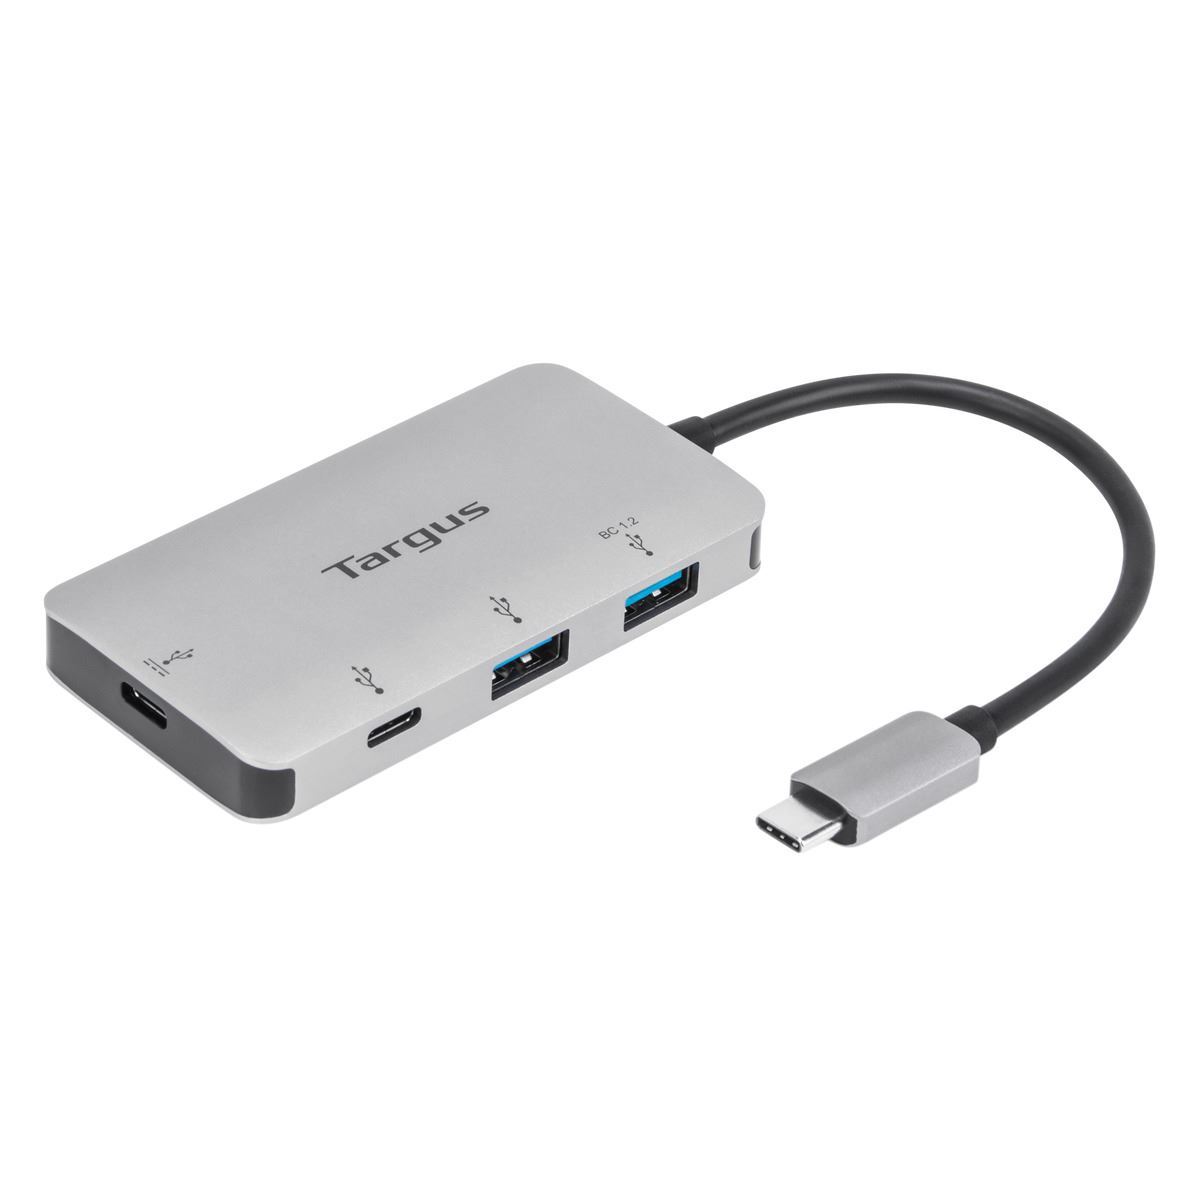 https://www.targus.com/content/images/thumbs/0056708_usb-c-multi-port-hub-with-2x-usb-a-and-2x-usb-c-ports-with-100w-pd-pass-thru.jpeg